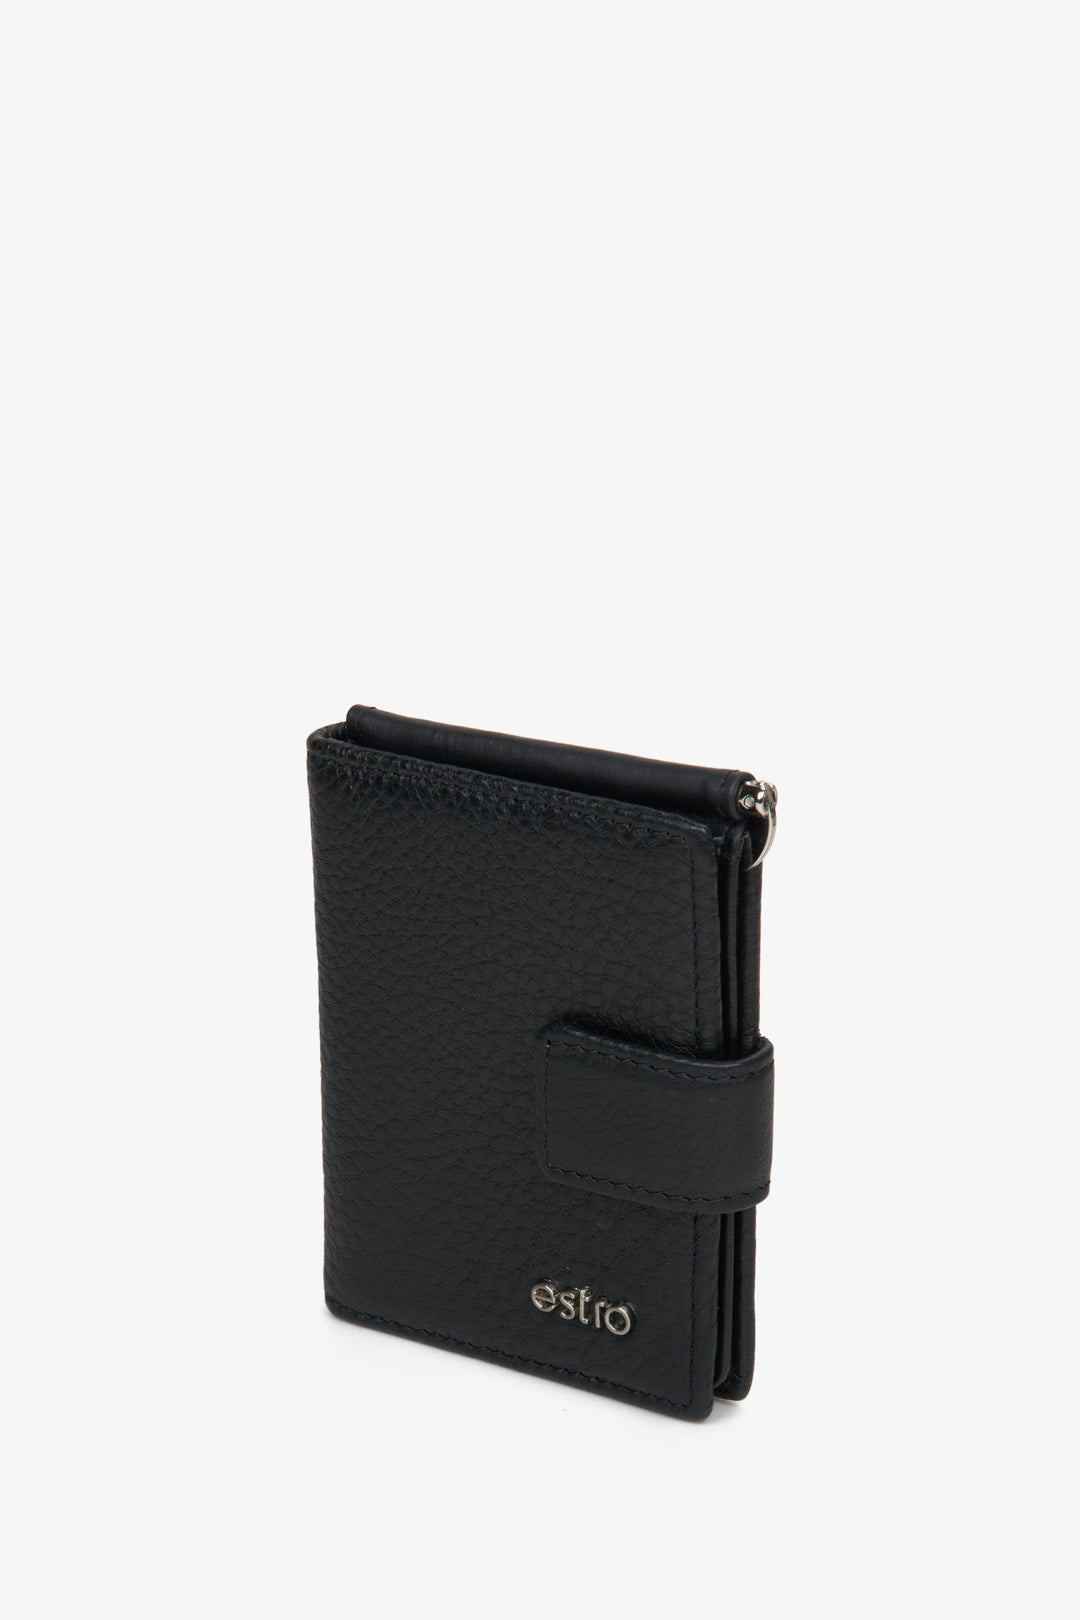 Men's Small Black Wallet made of Genuine Leather with Buckle Estro ER00114459.